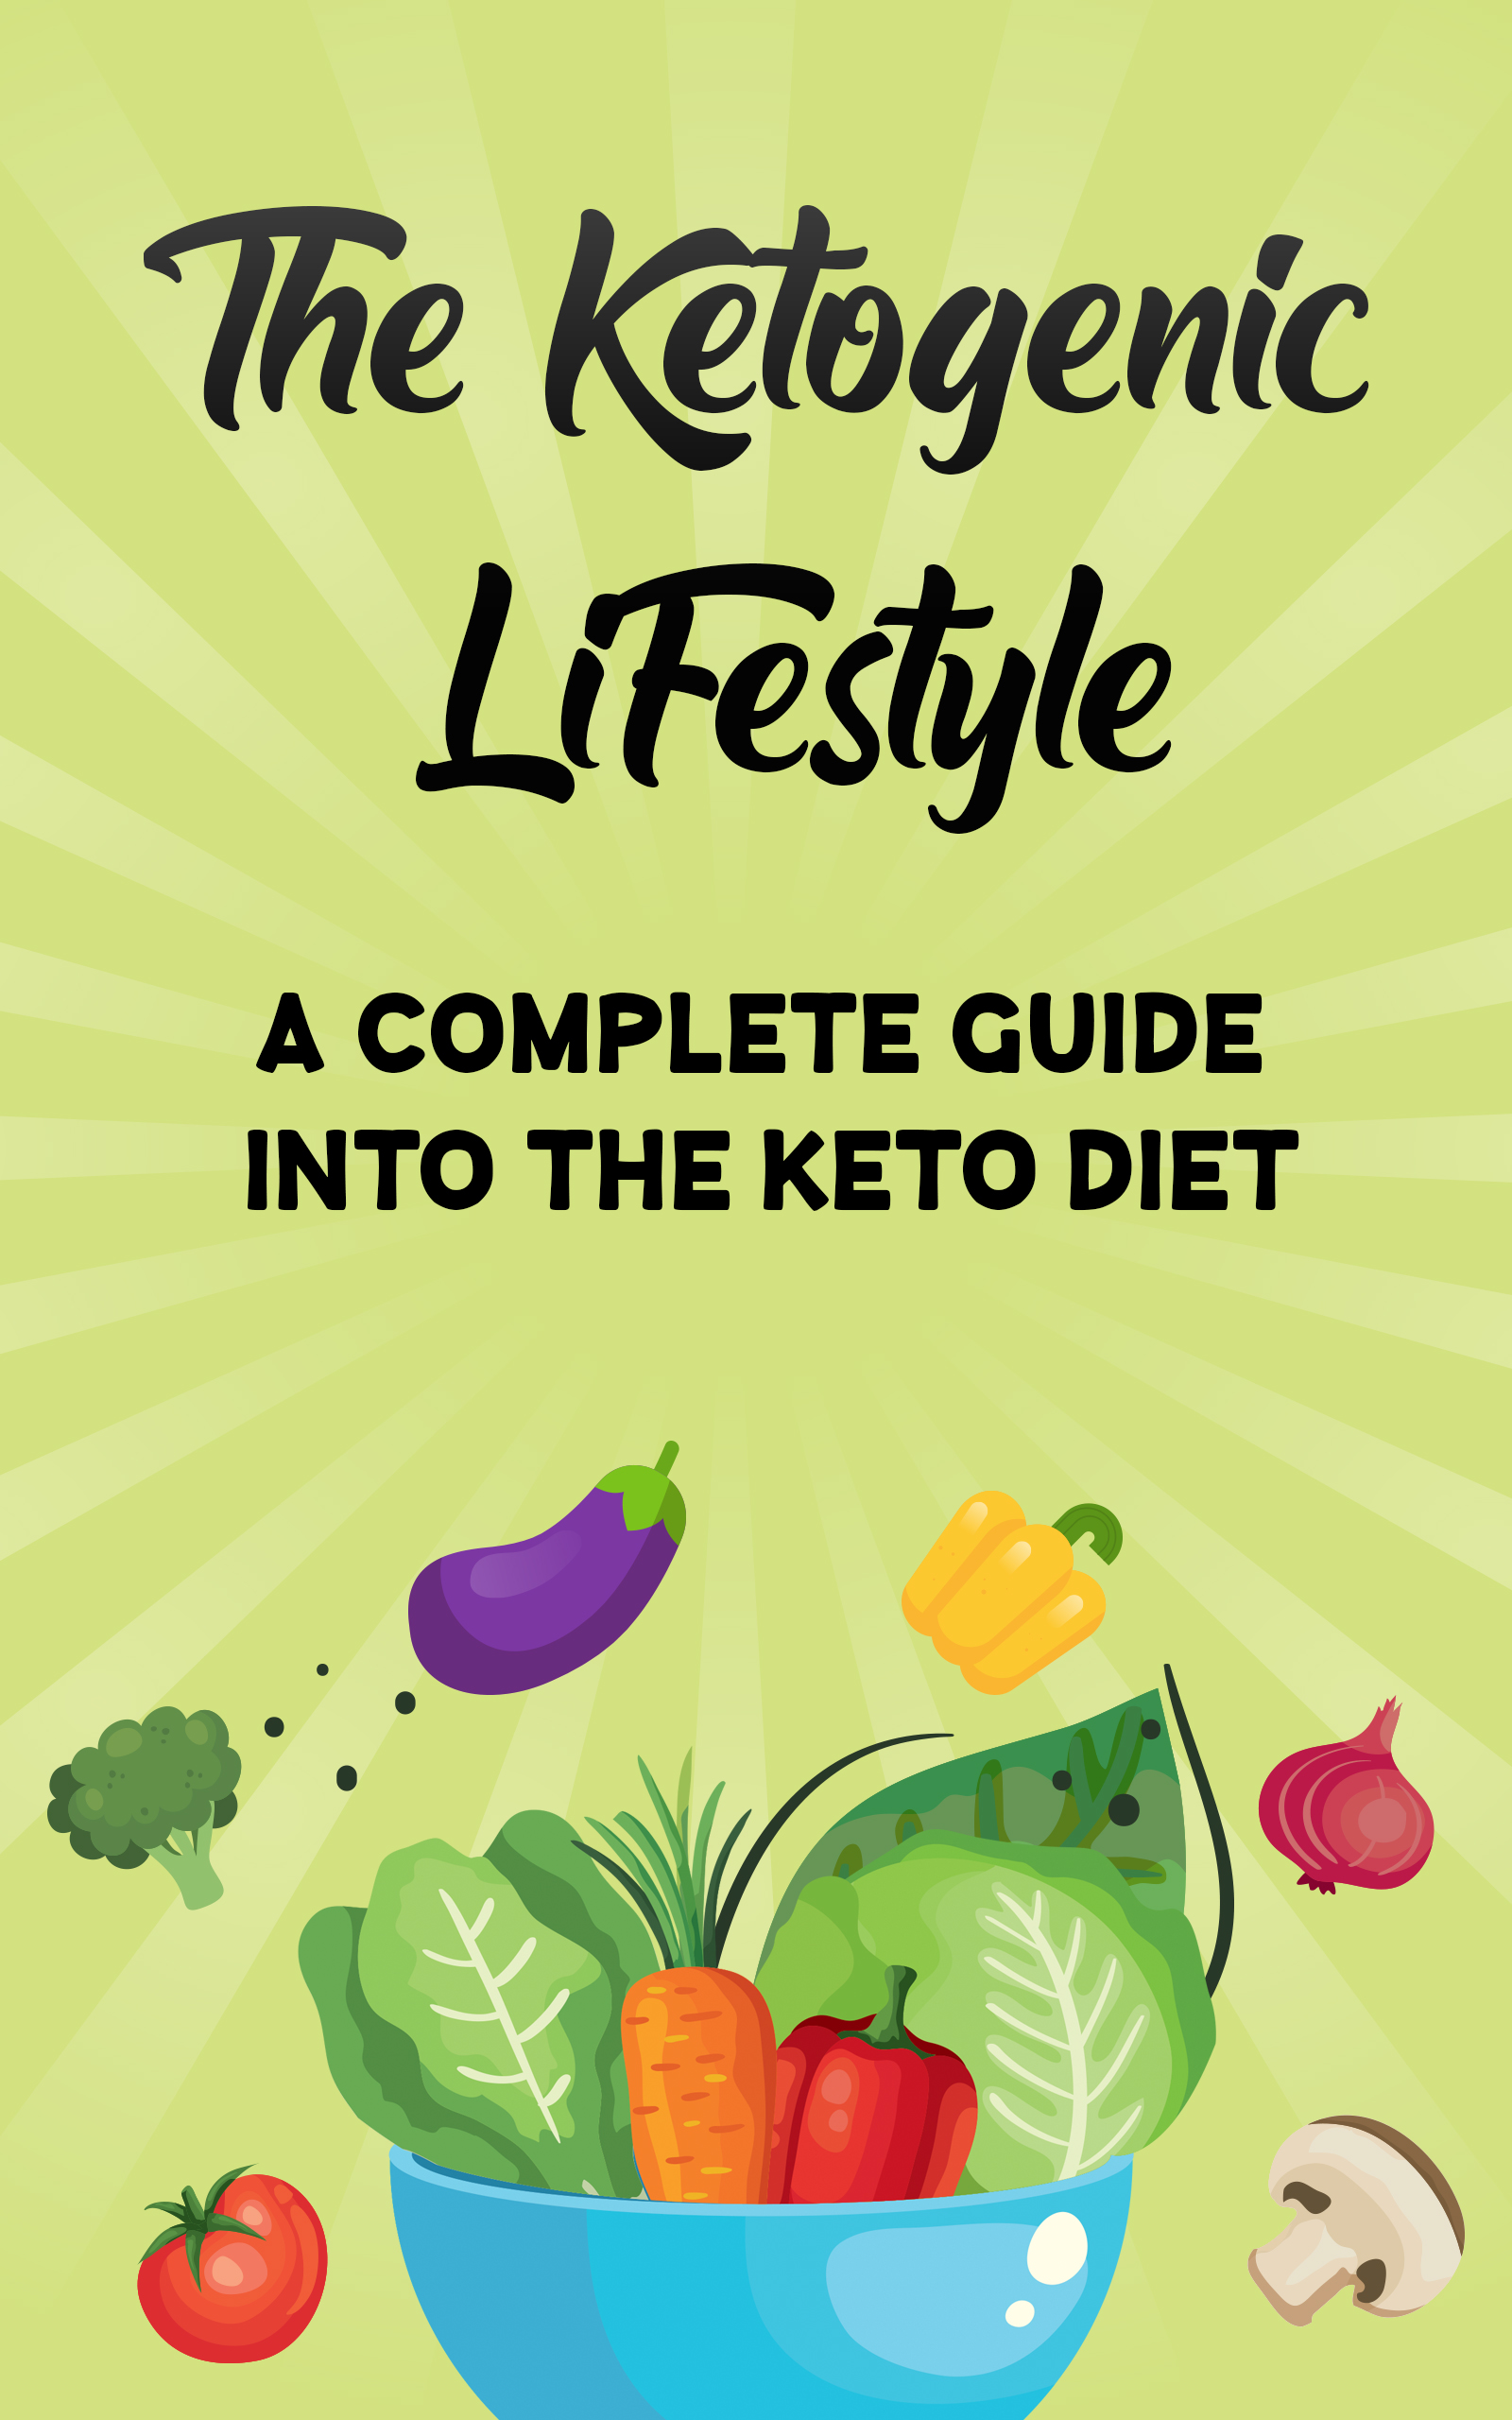 FREE: The Ketogenic Lifestyle: A Complete Guide Into The Keto Diet by BK Clark